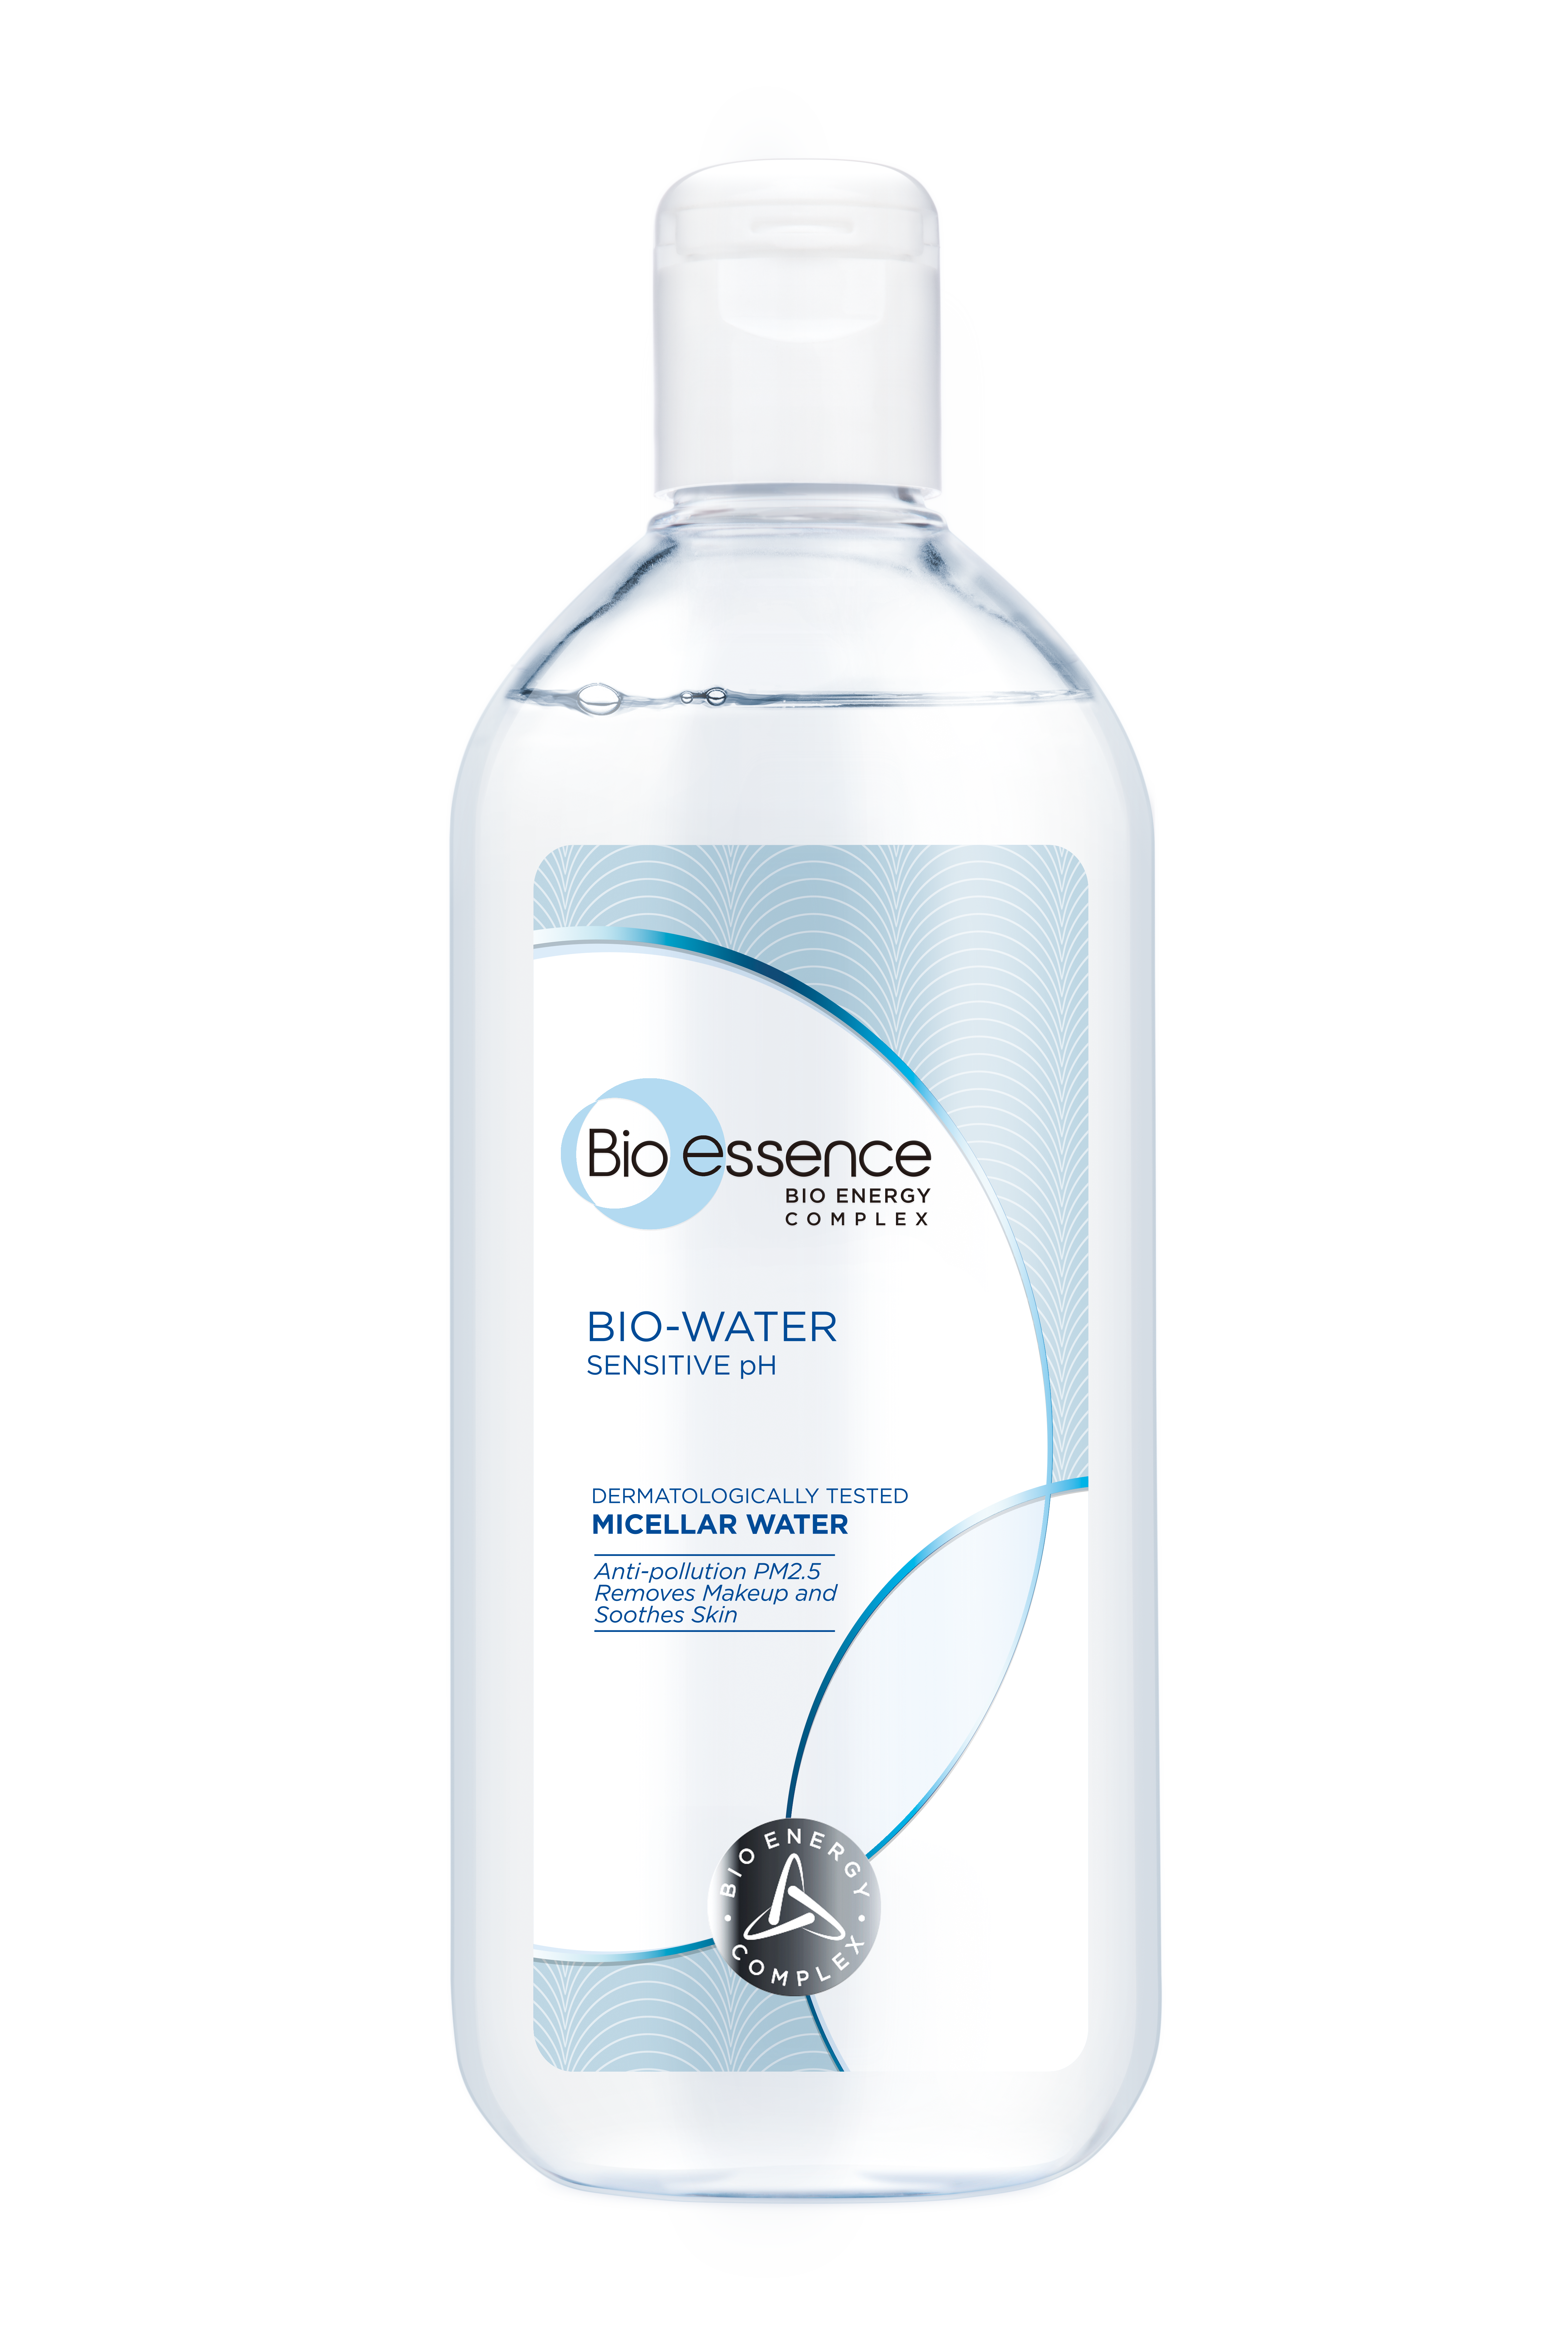 Bio-Water Sensitive pH Dermatologically Tested Micellar Water Anti-Pollution PM2.5 Removes Makeup and Soothes Skin